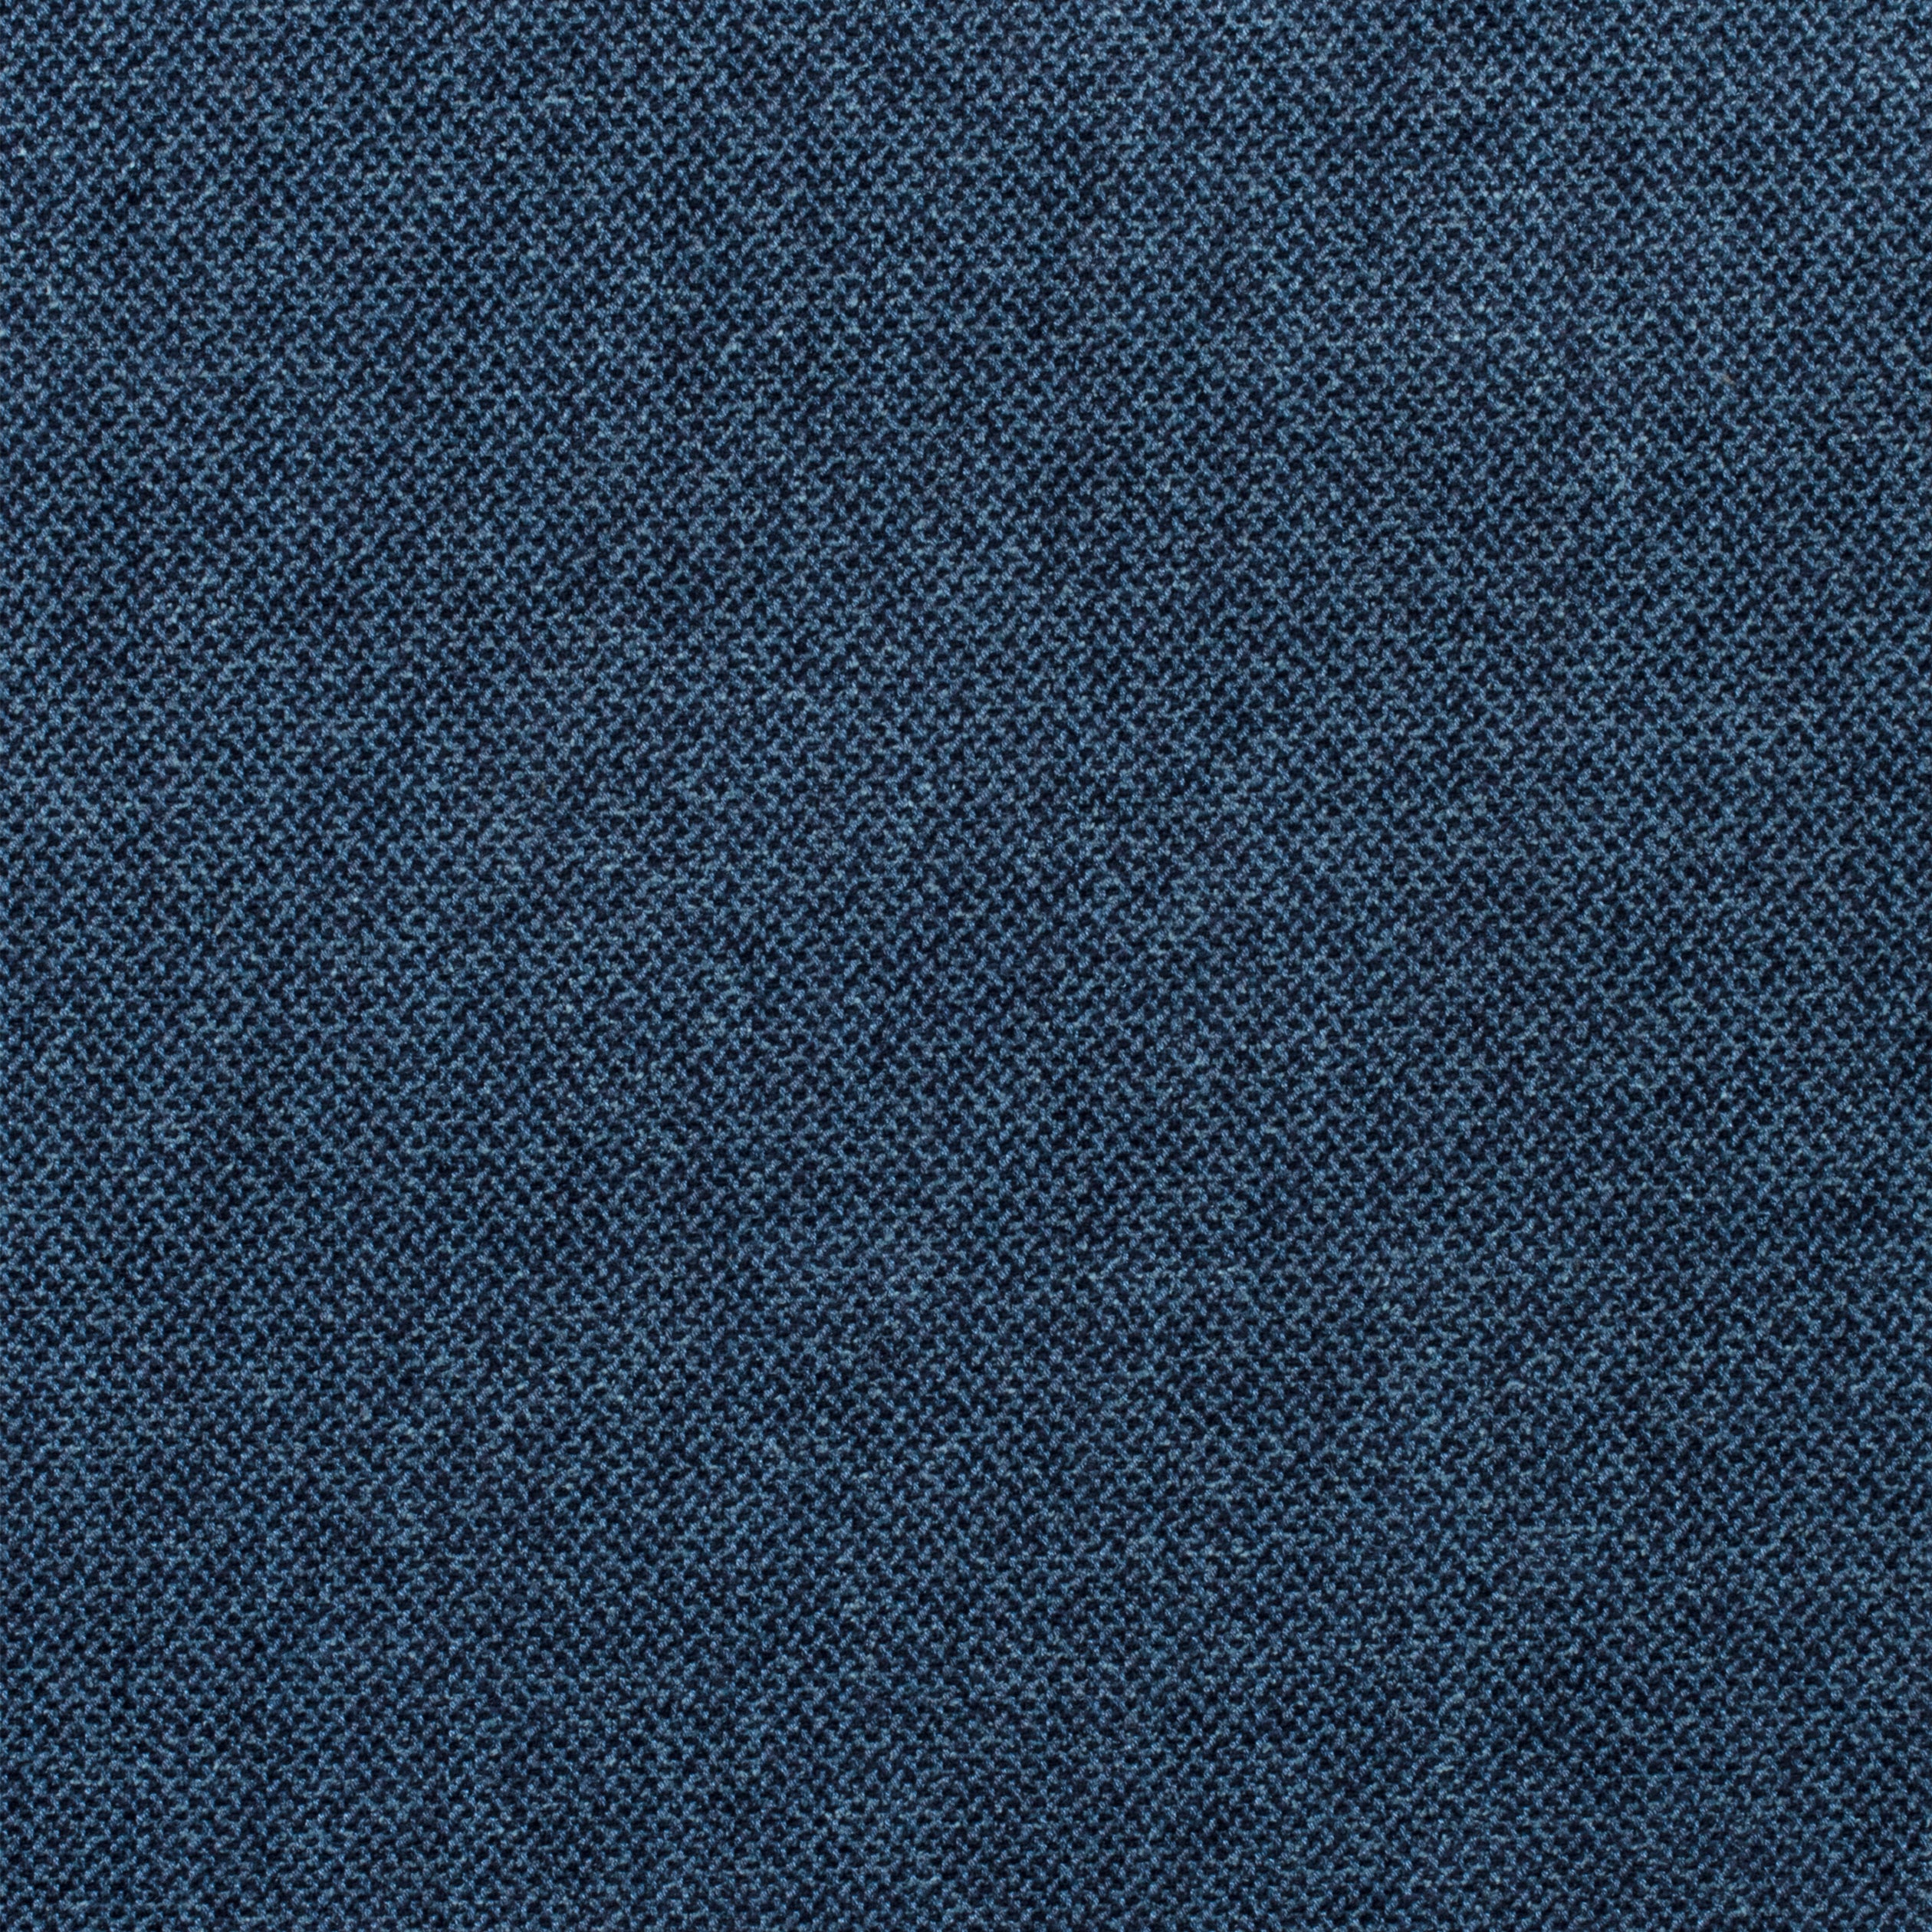 Picco fabric in navy color - pattern number W80708 - by Thibaut in the Woven Resource 11: Rialto collection